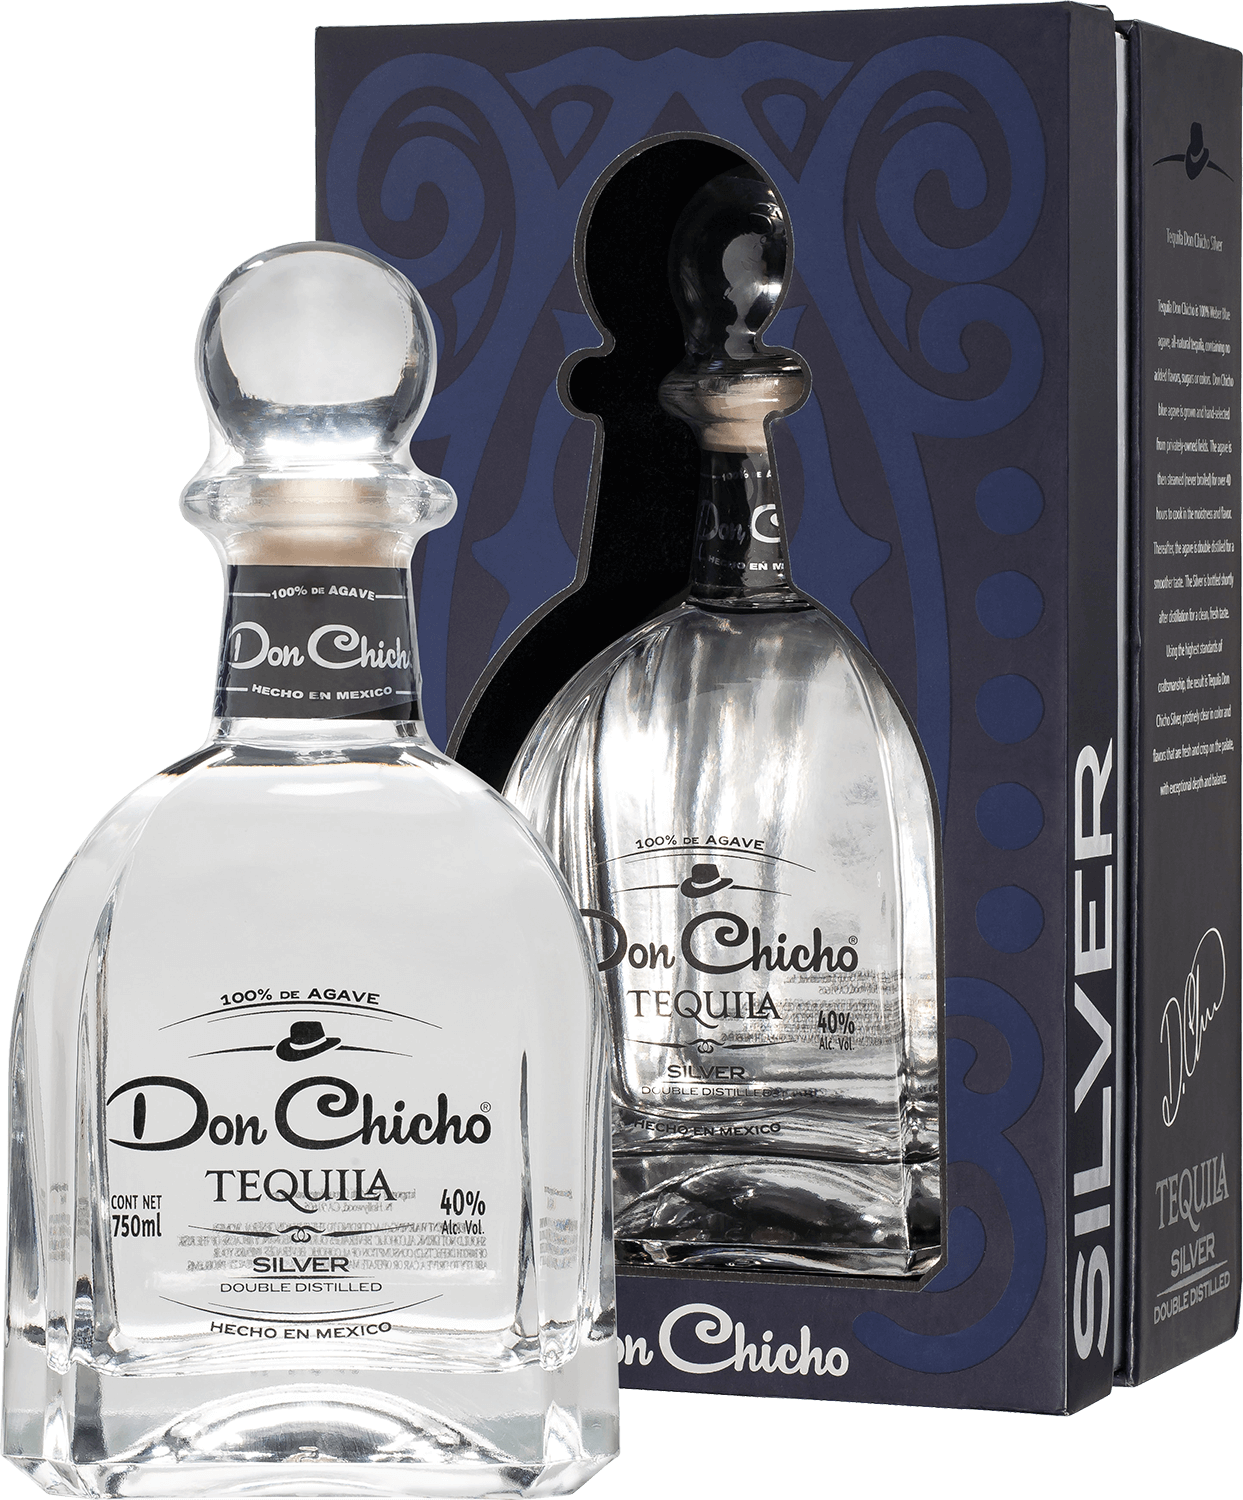 Don Chicho Silver Tequila (gift box)